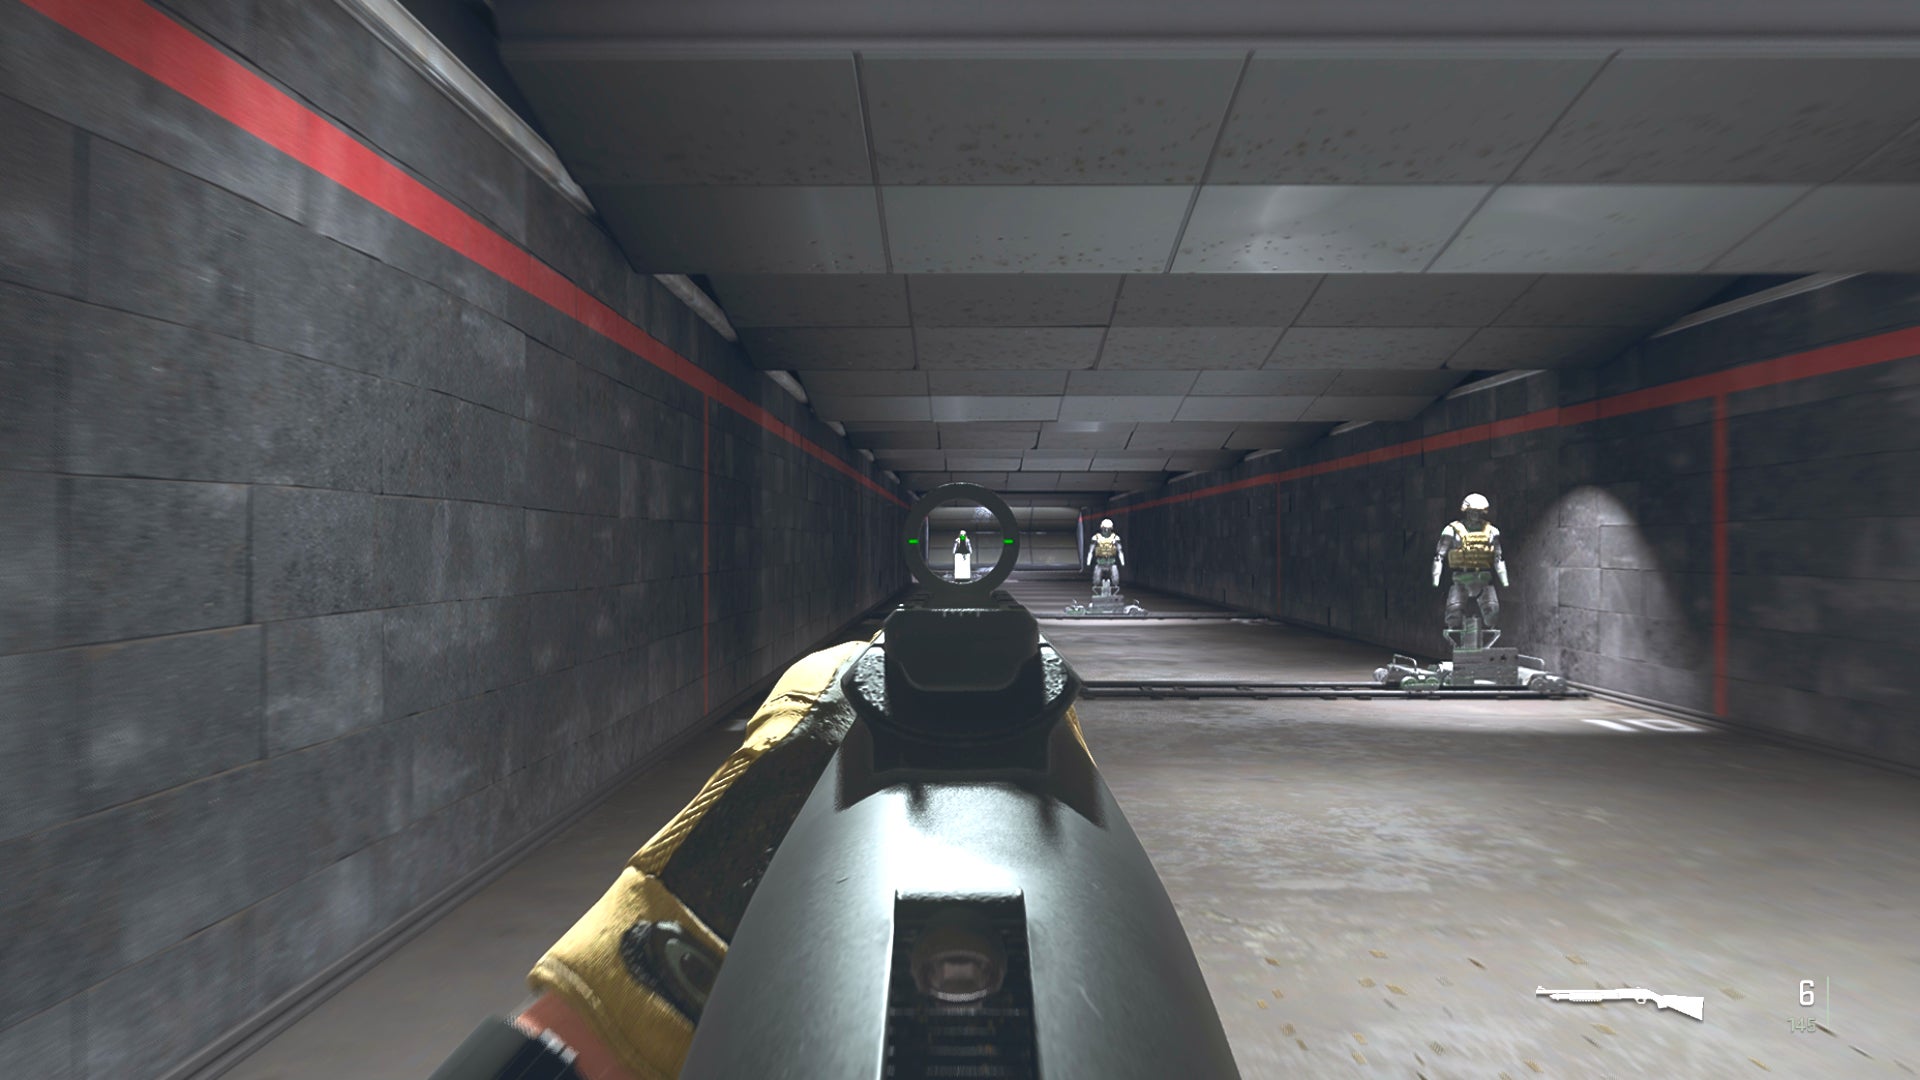 The player in Warzone 2.0 aims at a training dummy with the Bryson 800 ironsights.